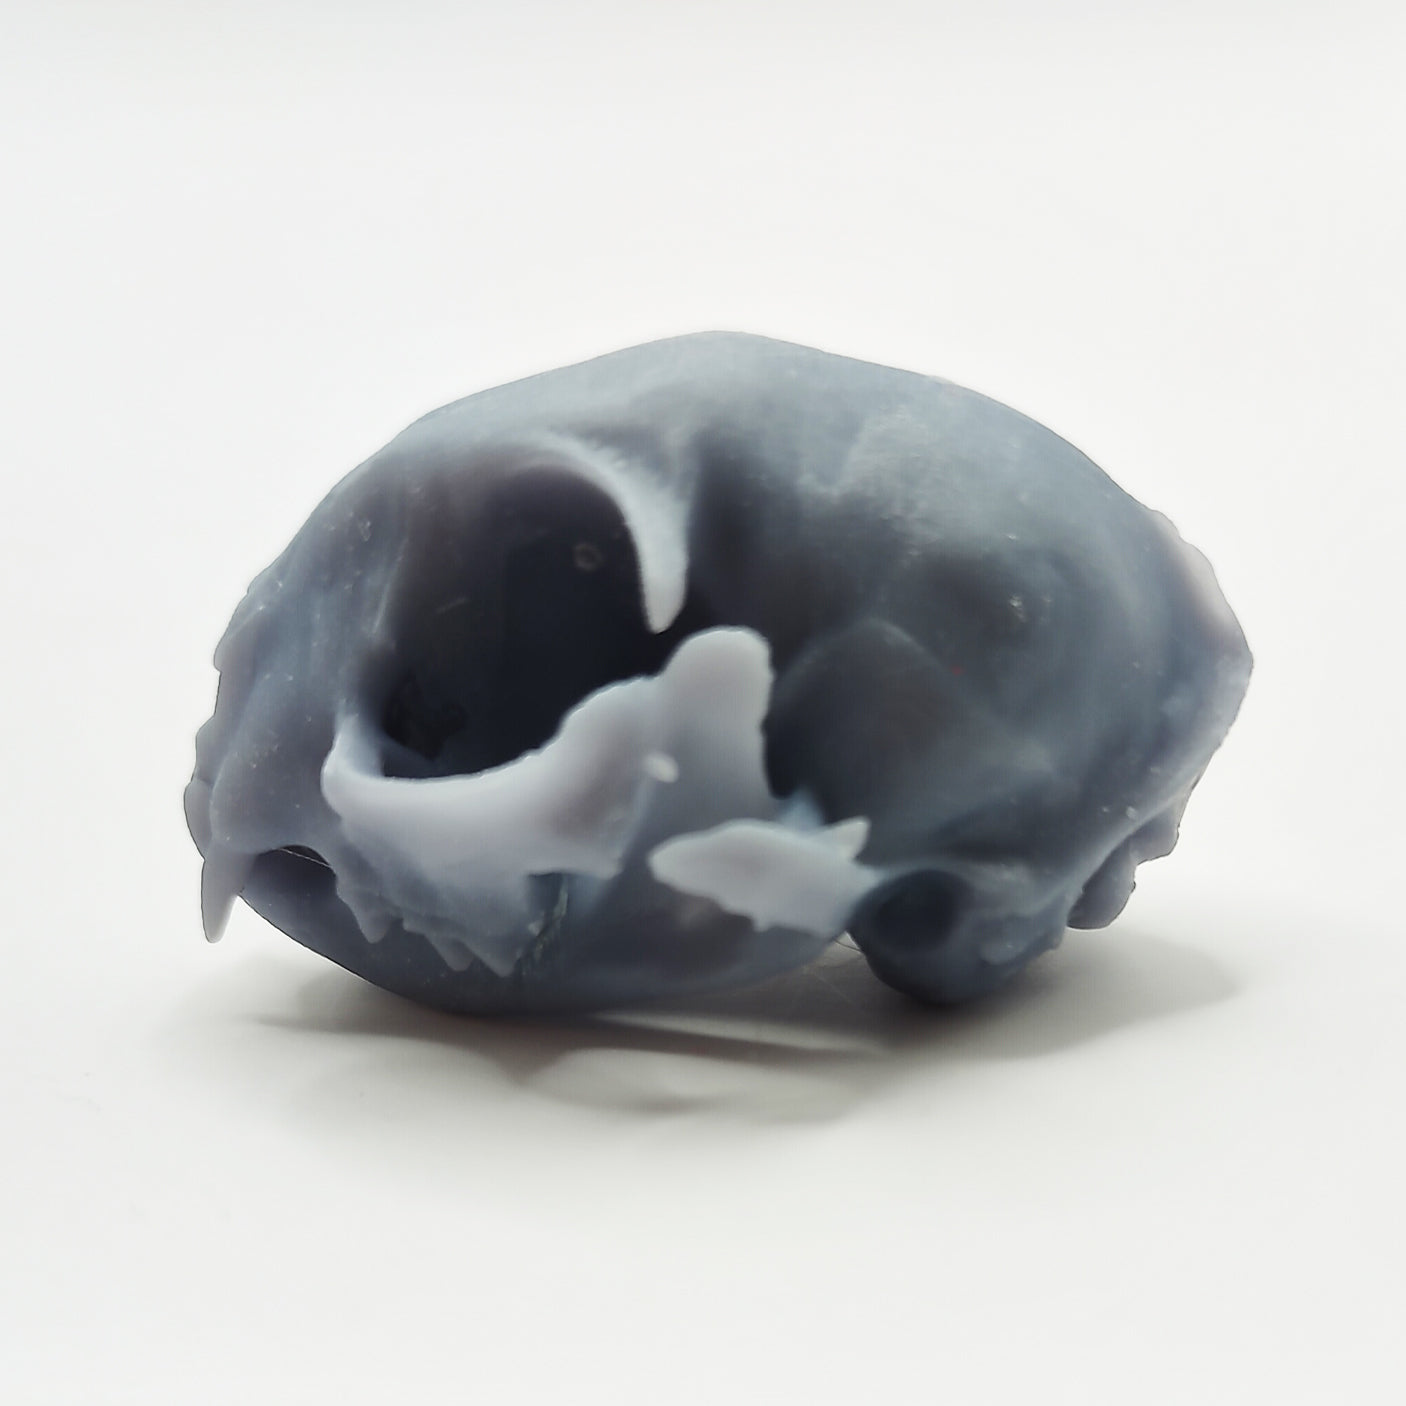 Miniature cat skull with closed jaw